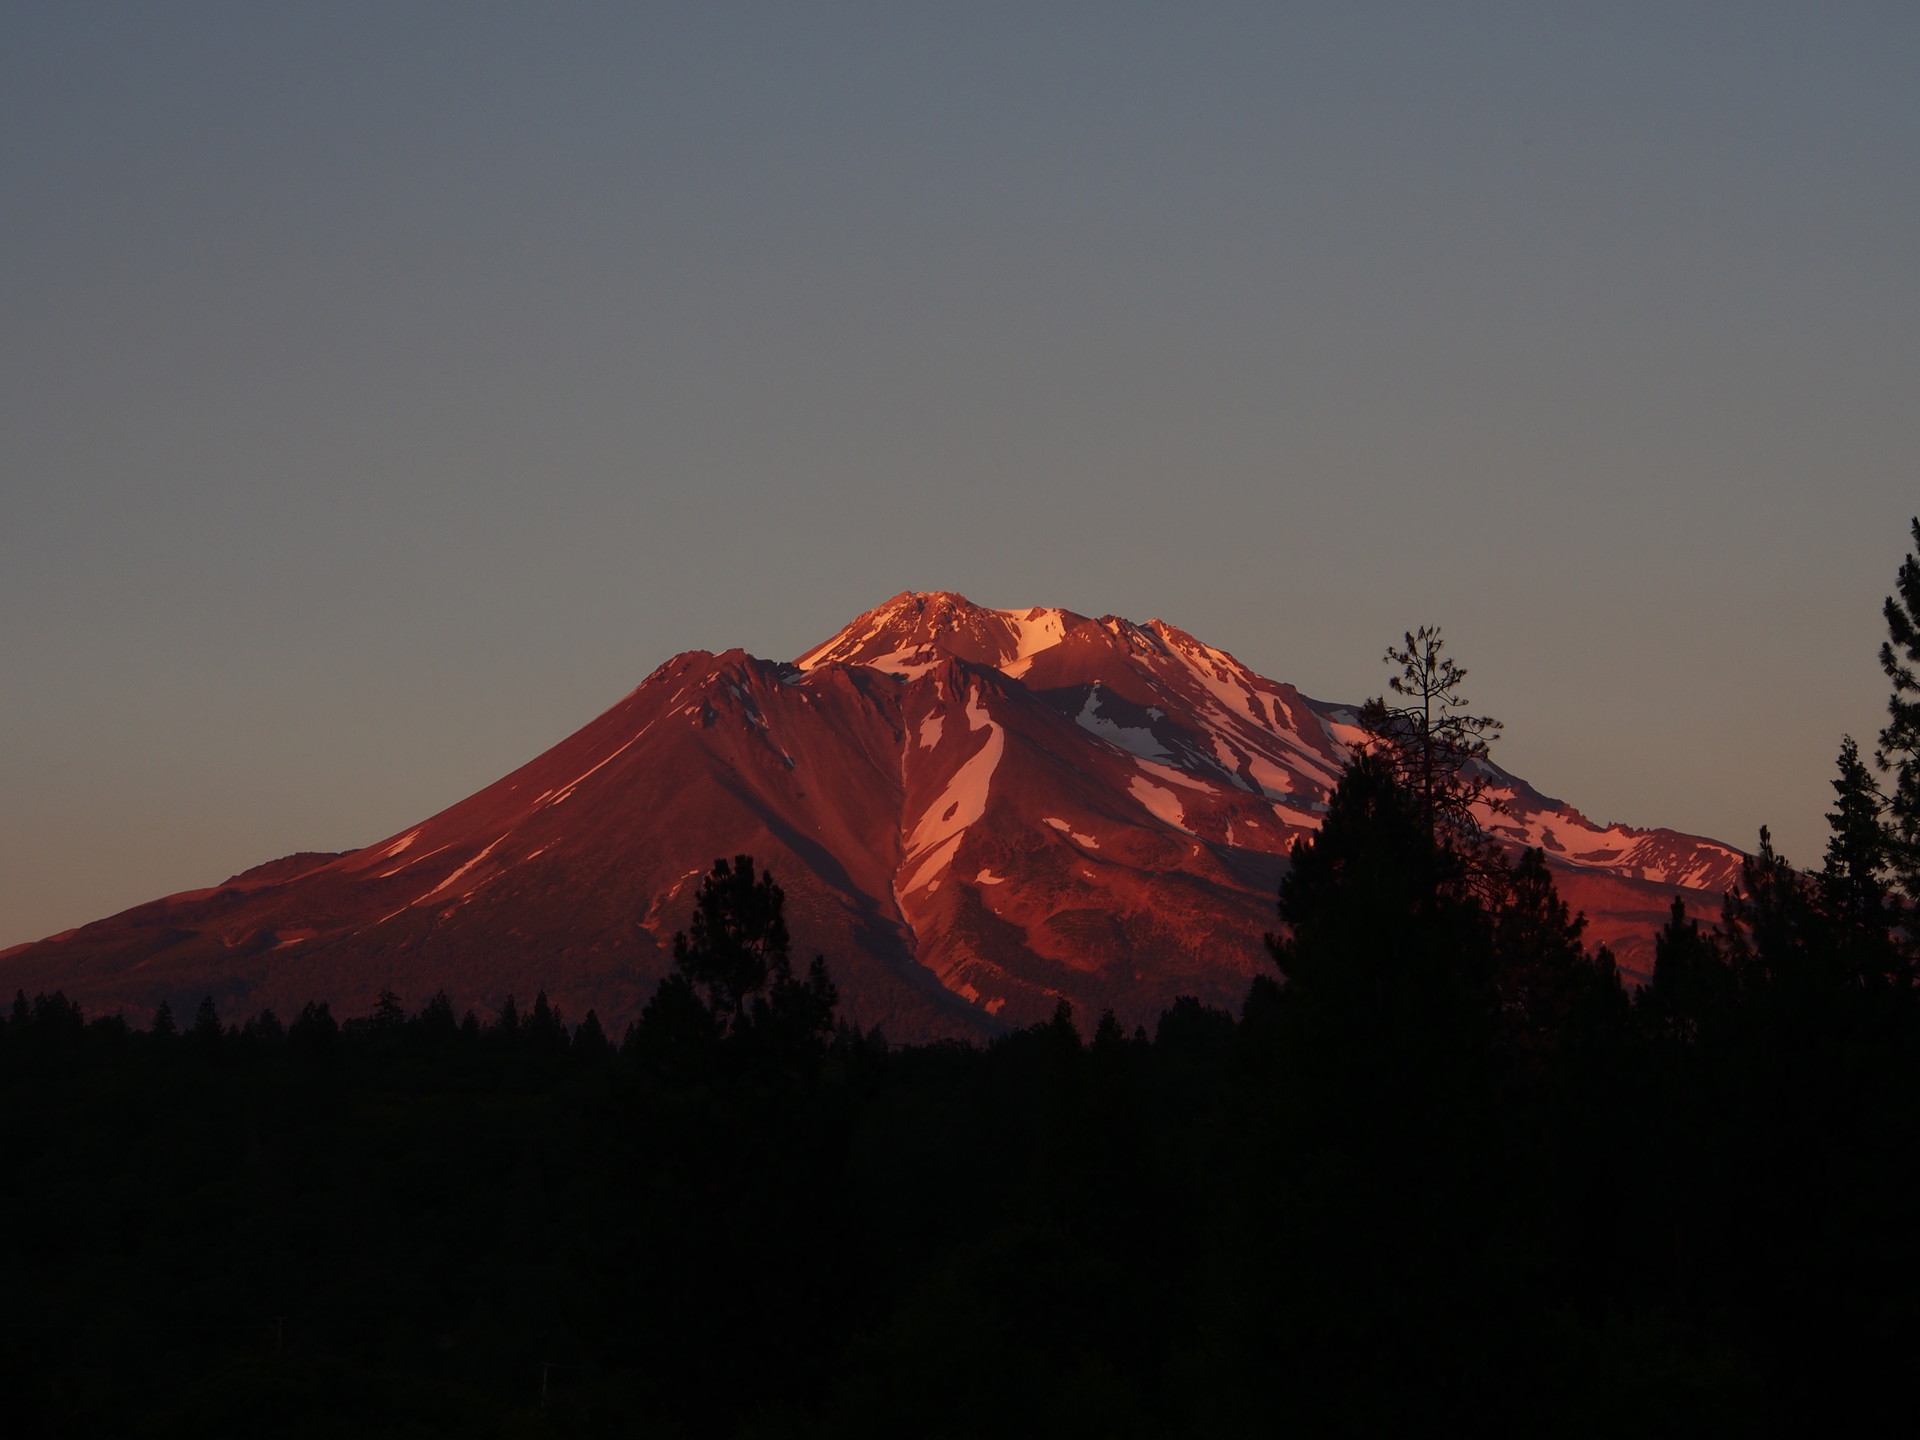 The Unexplained Disappearances And UFO Sightings At Mount Shasta